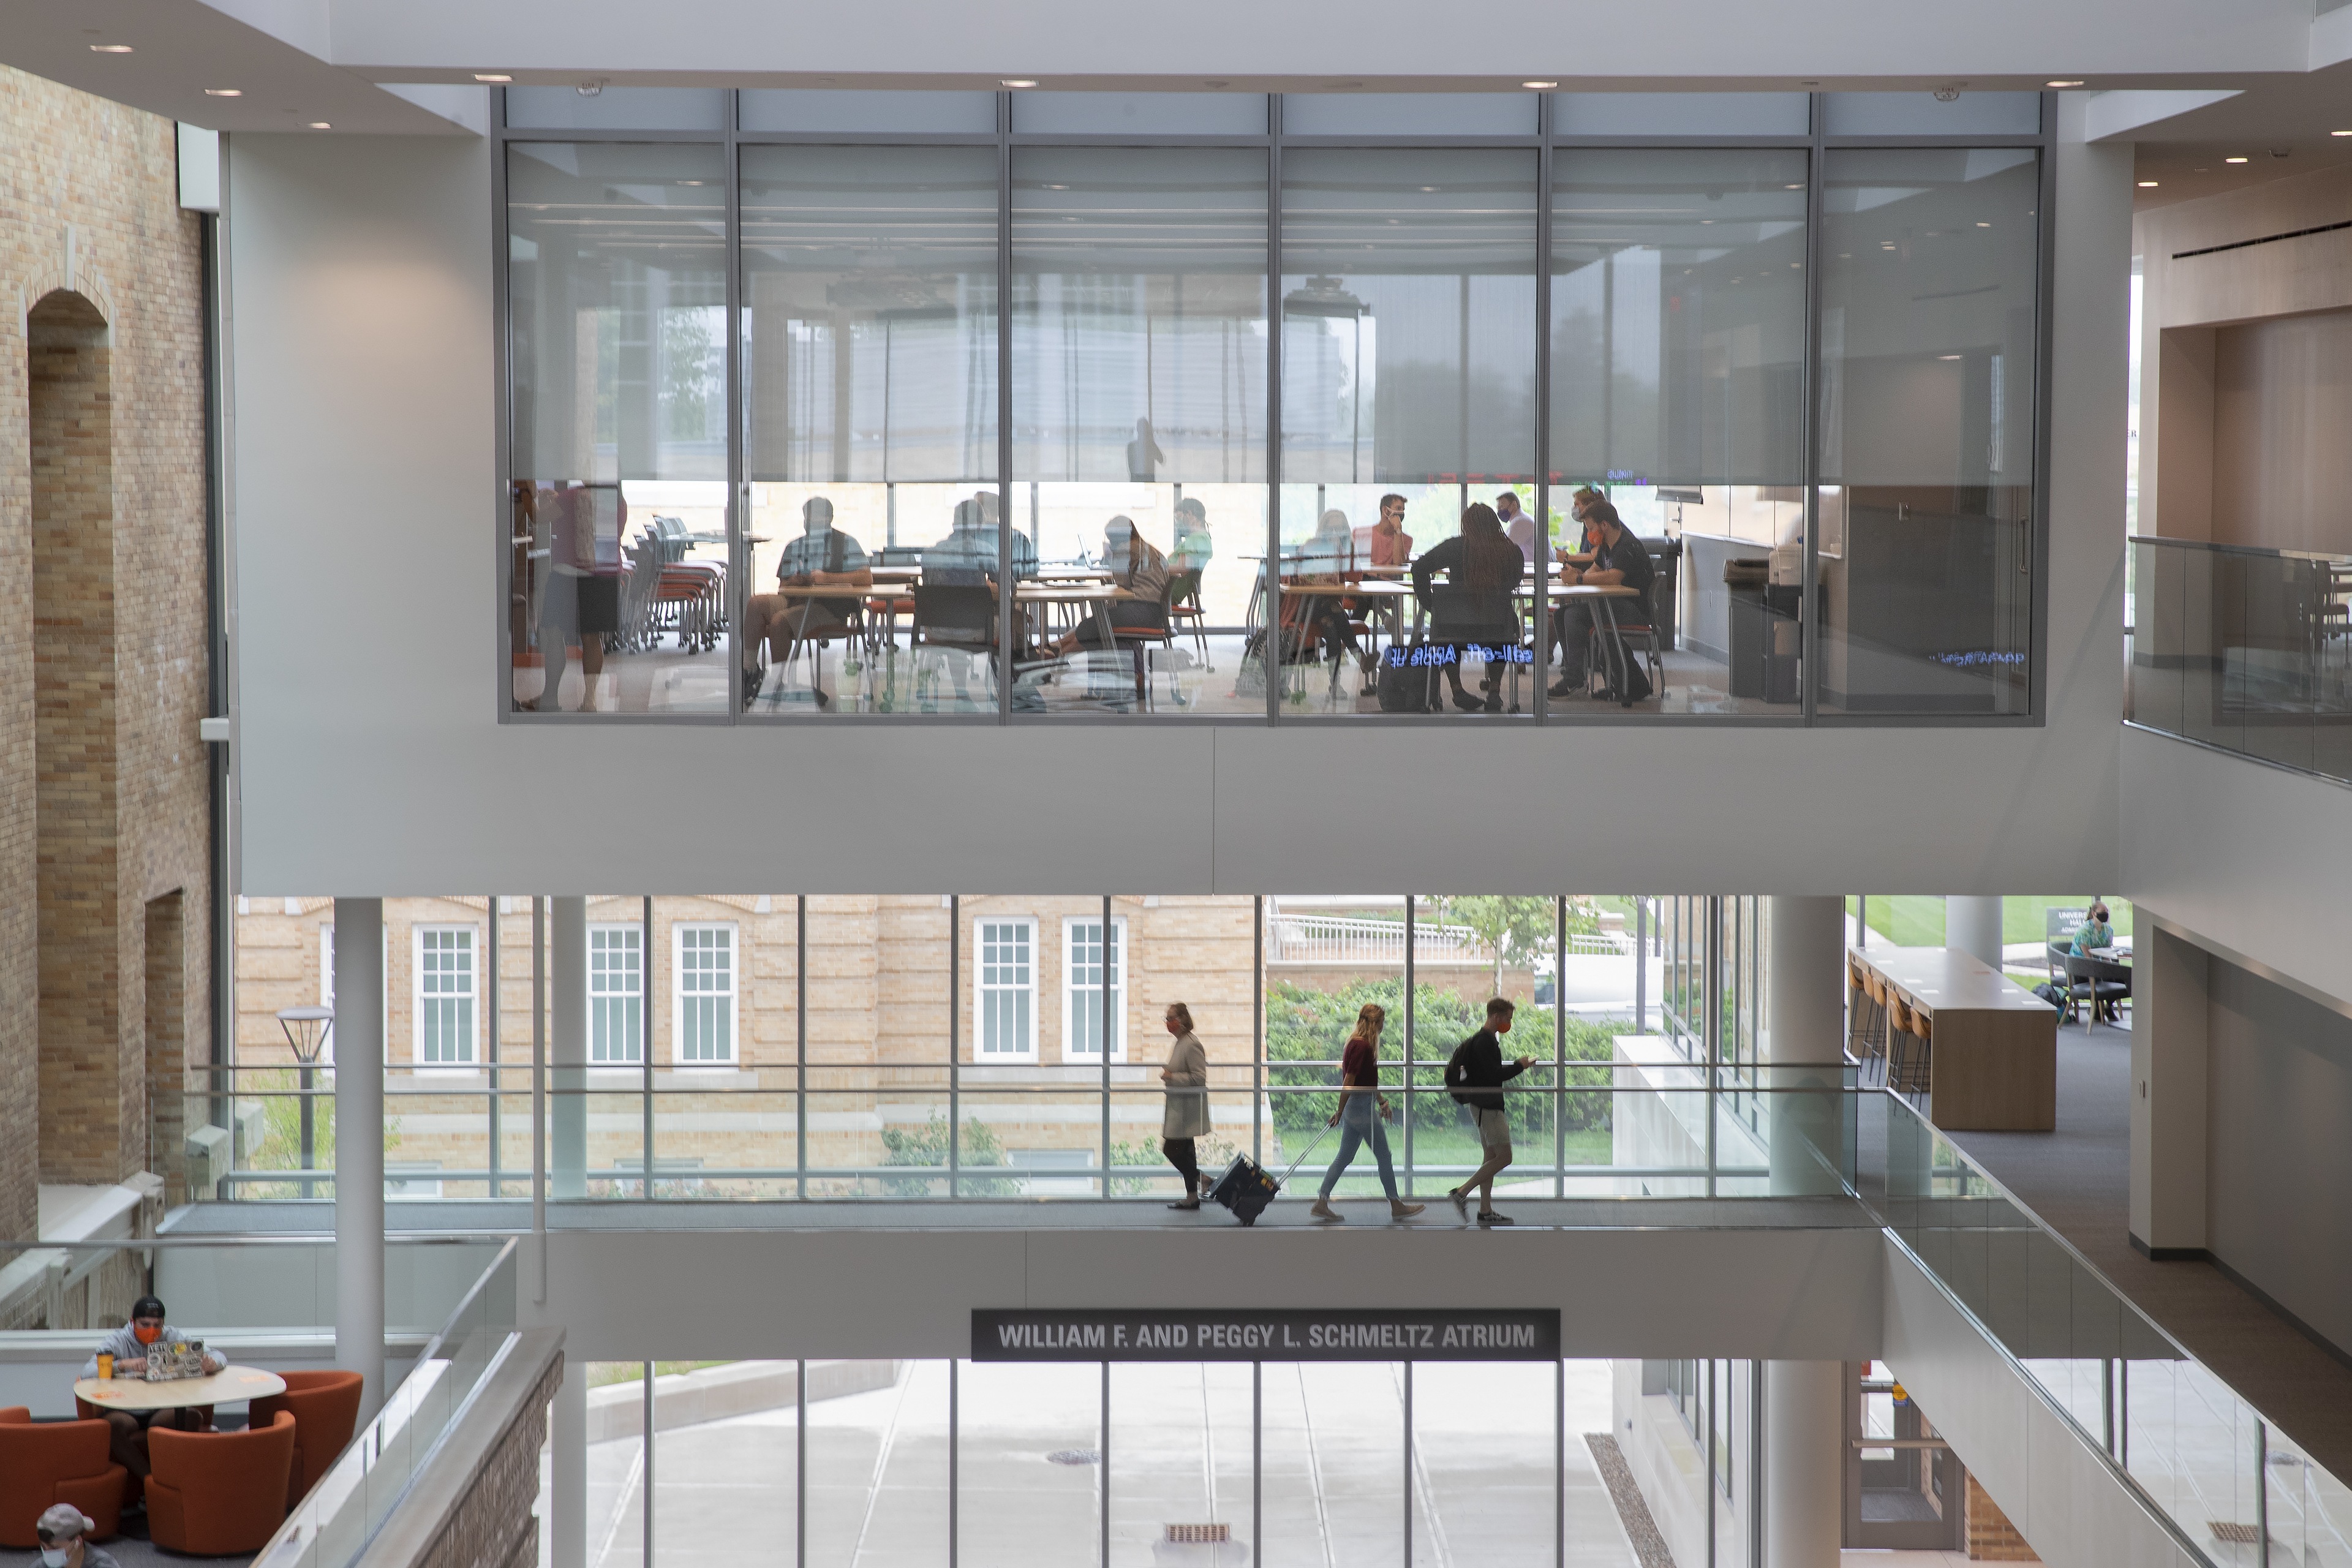 View of the William F. and Peggy L. Schmeltz Atrium and the floating classroom in the Maurer Center on BGSU's campus